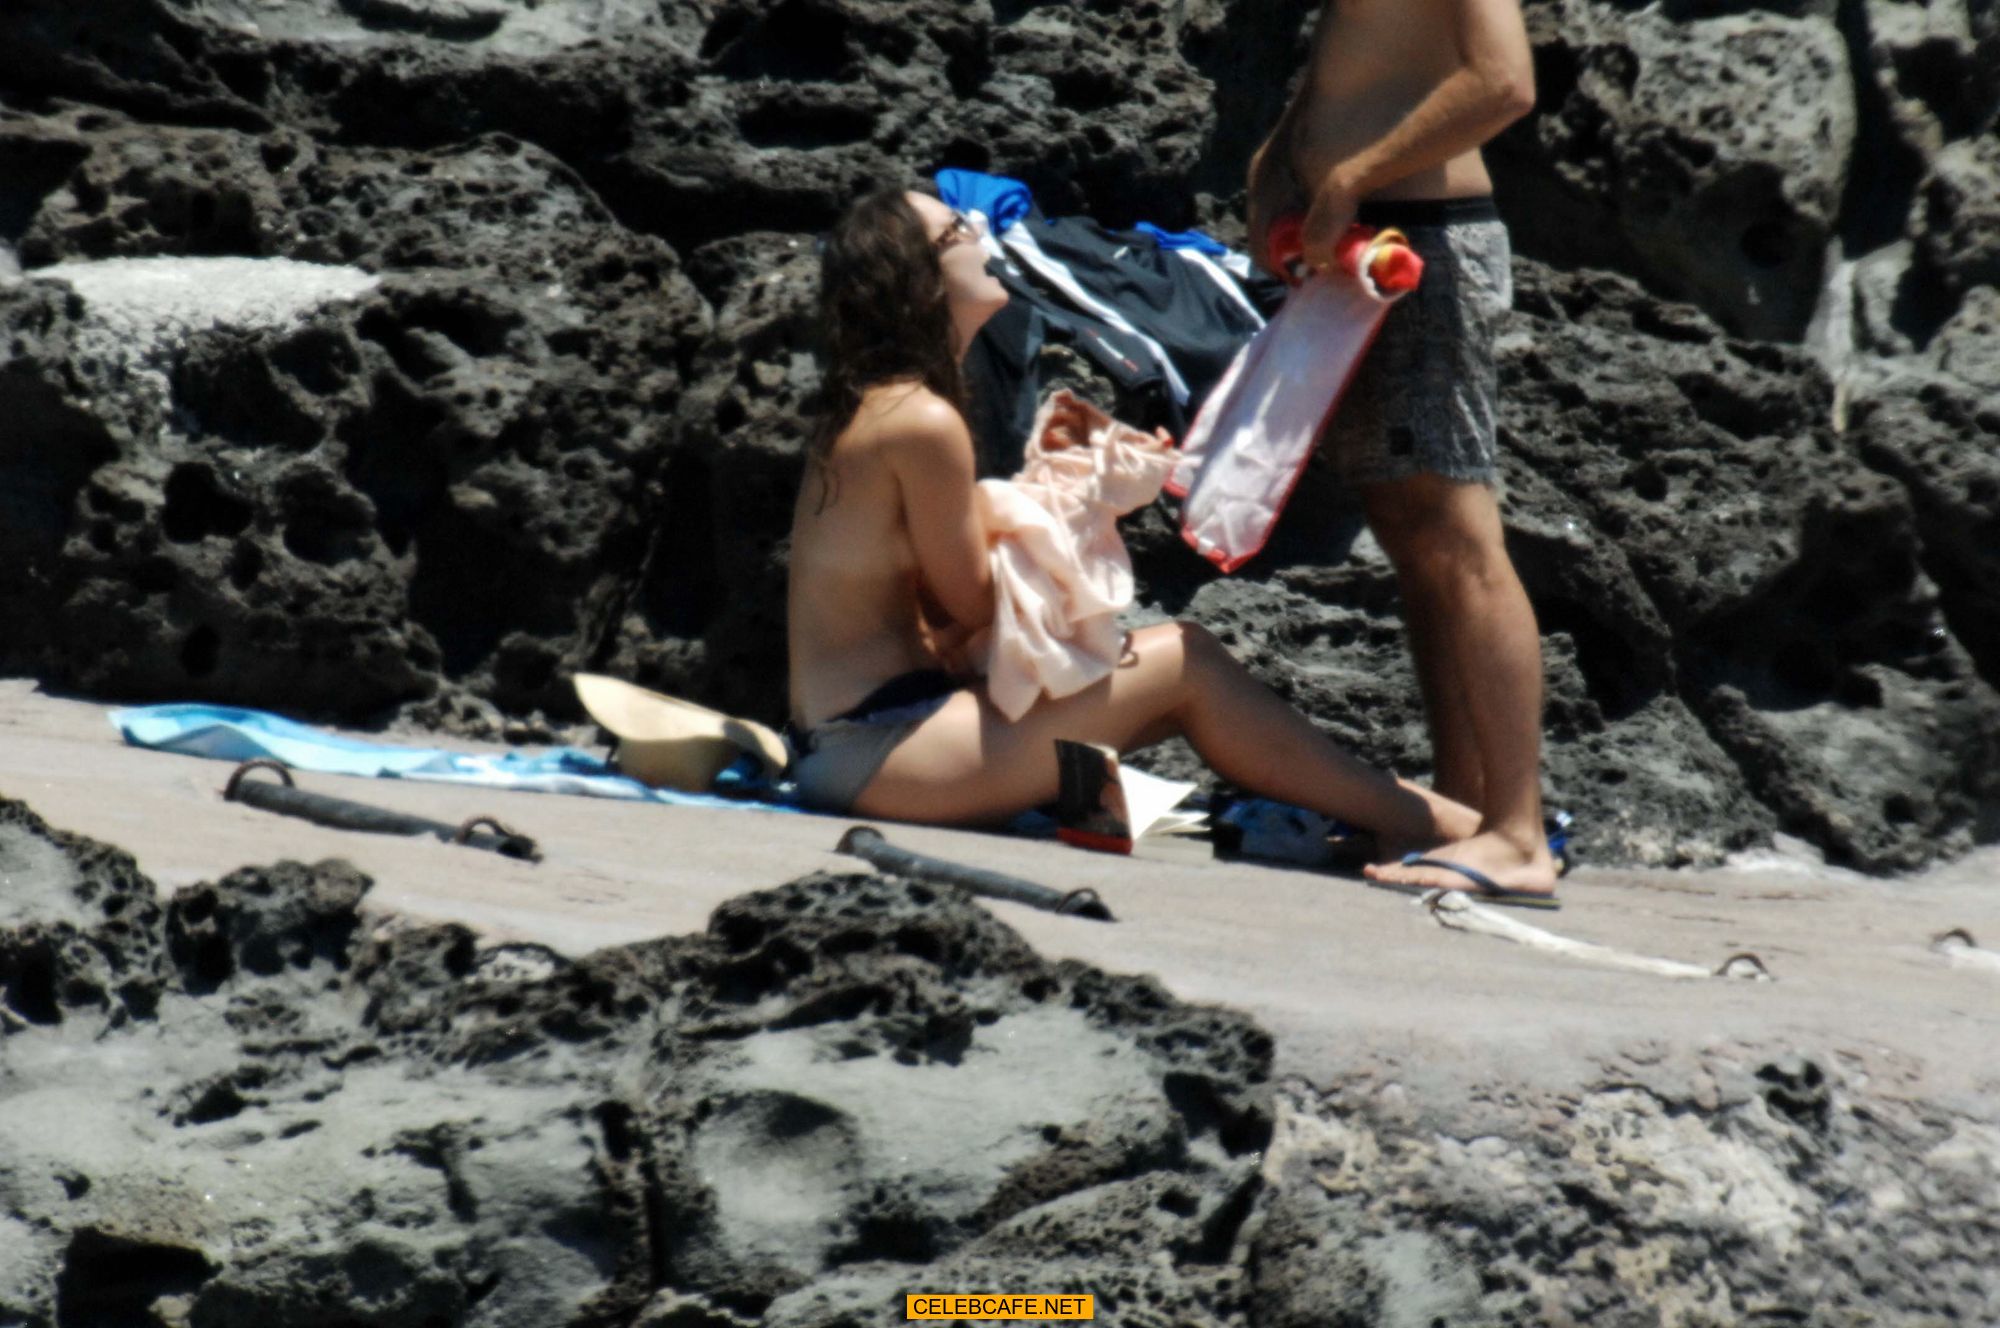 keira_knightley_on_the_beach_in_pantelleria_some_topless_62918_21.jpg